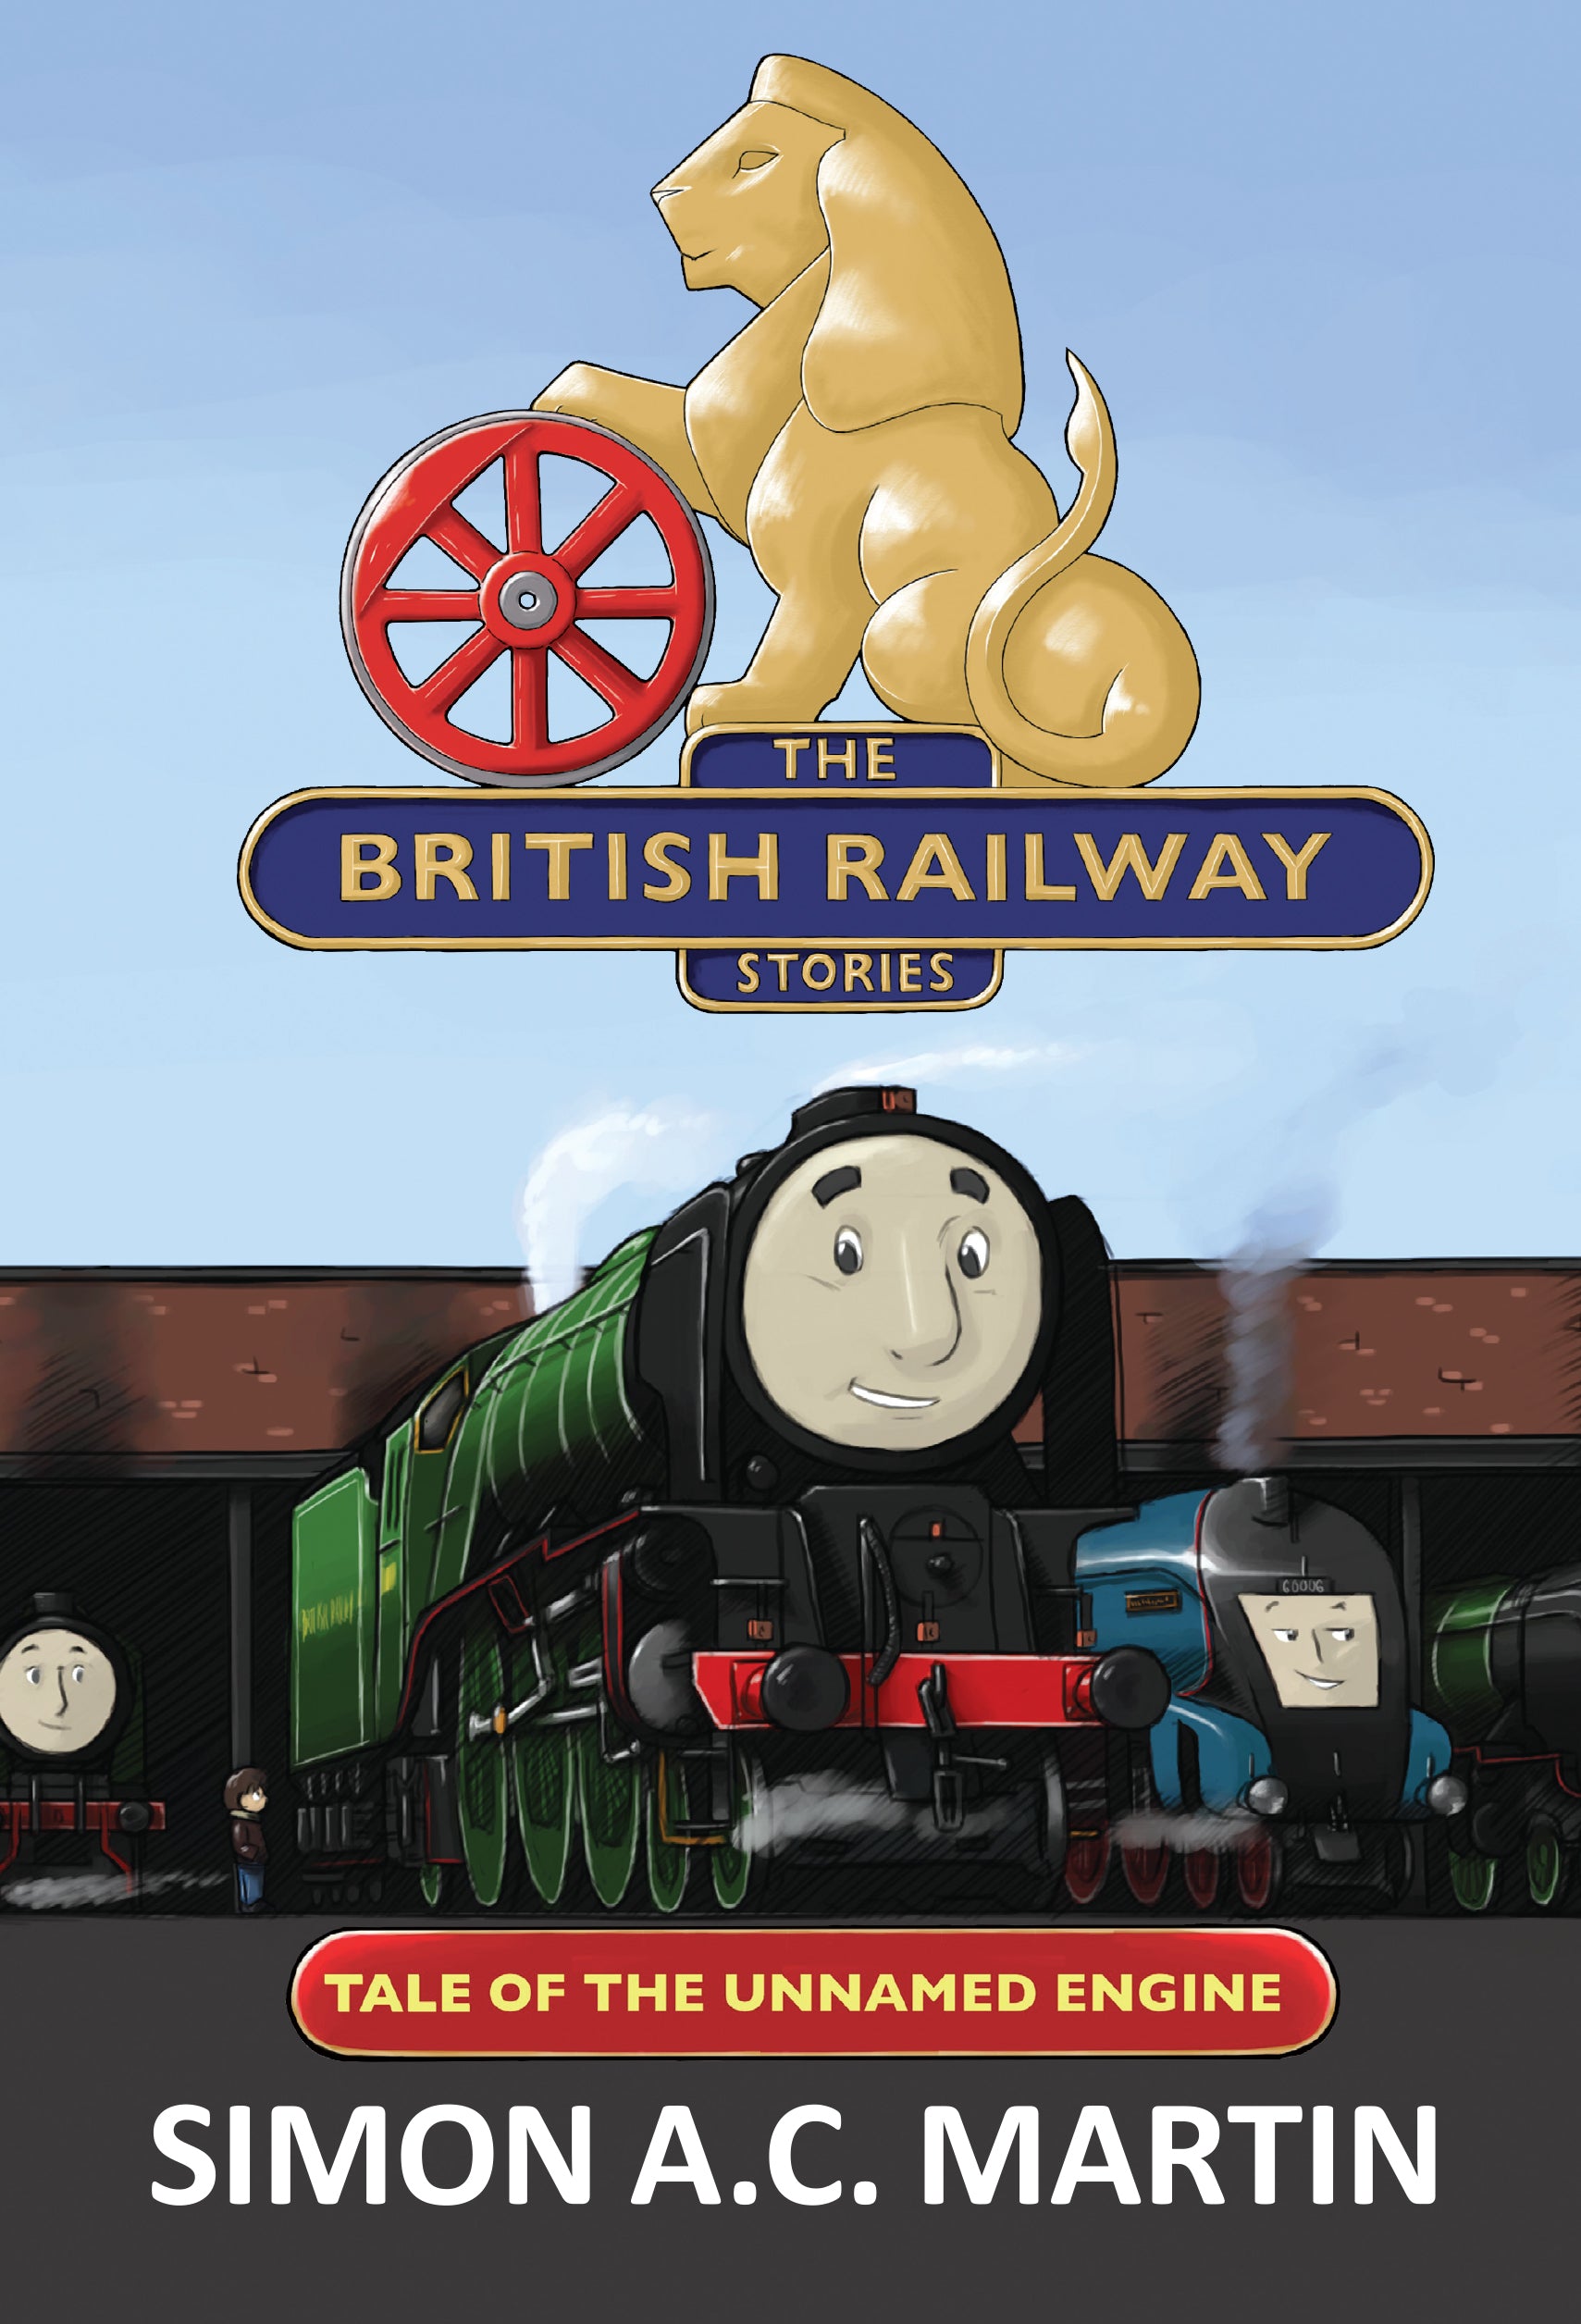 50% OFF the RRP £11.95 The British Railway Stories 1 - The Tale of the Un-named Engine